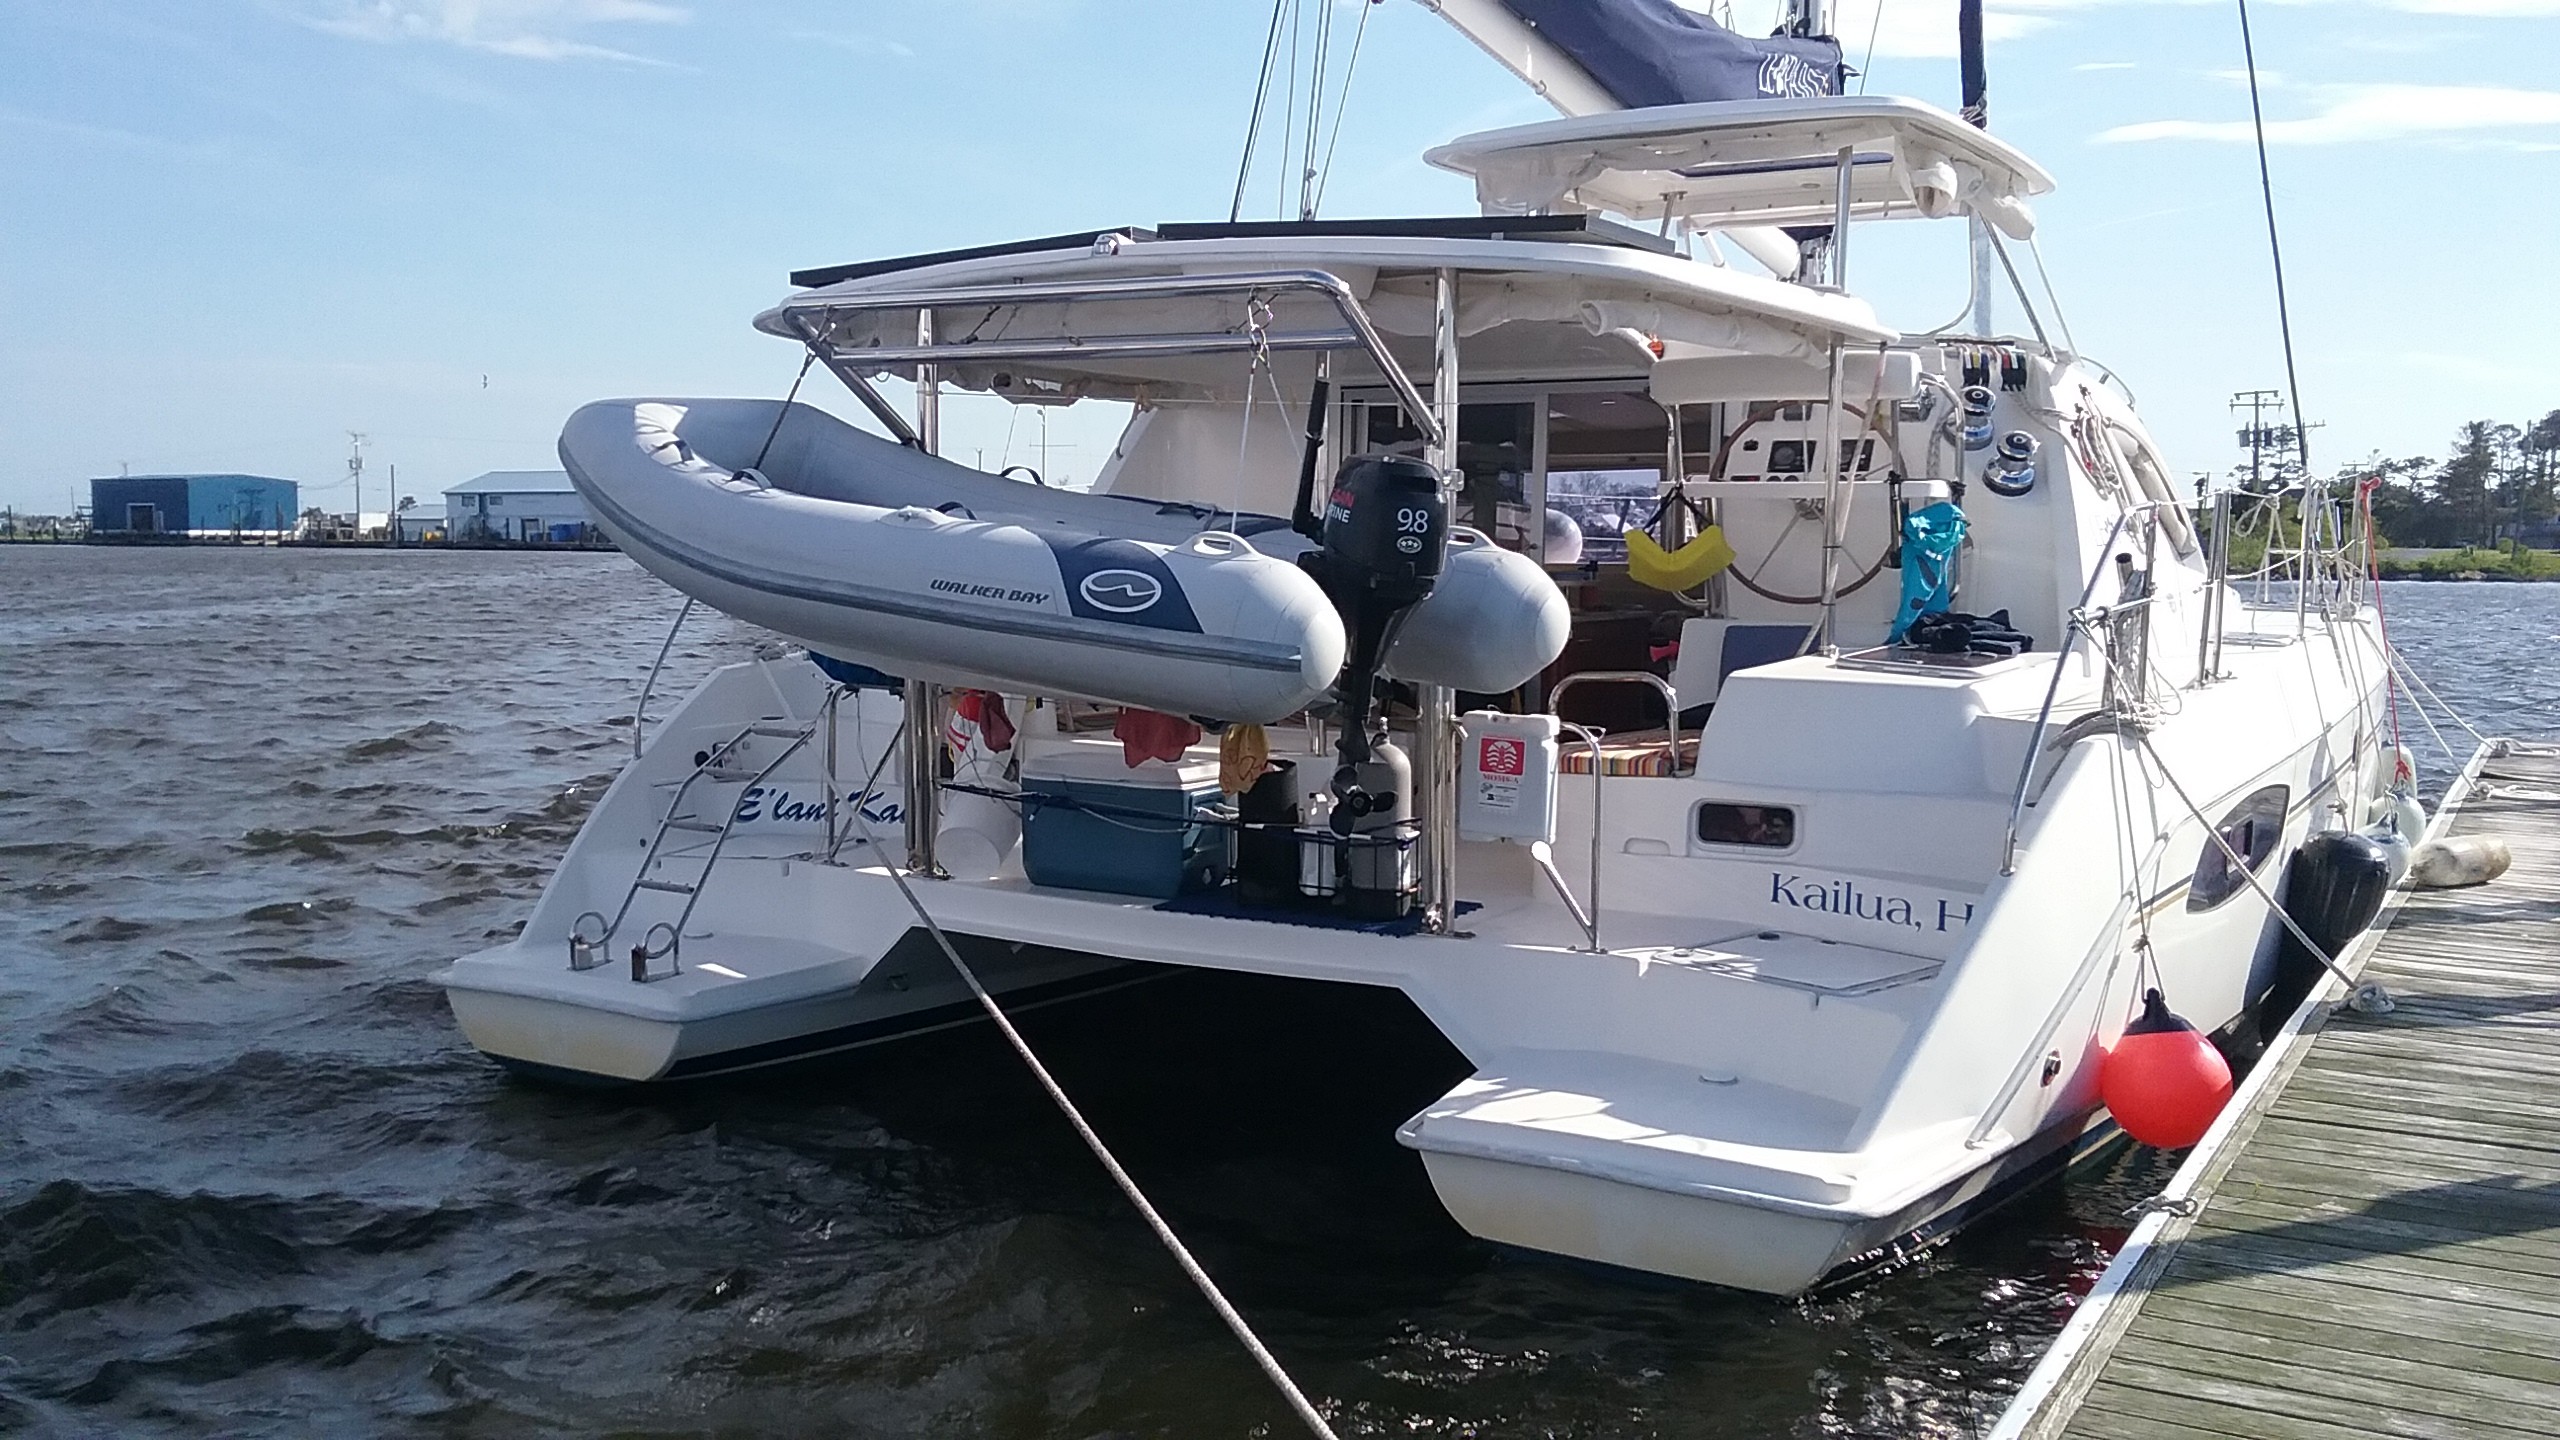 Used Sail Catamaran for Sale 2012 Leopard 39 Boat Highlights